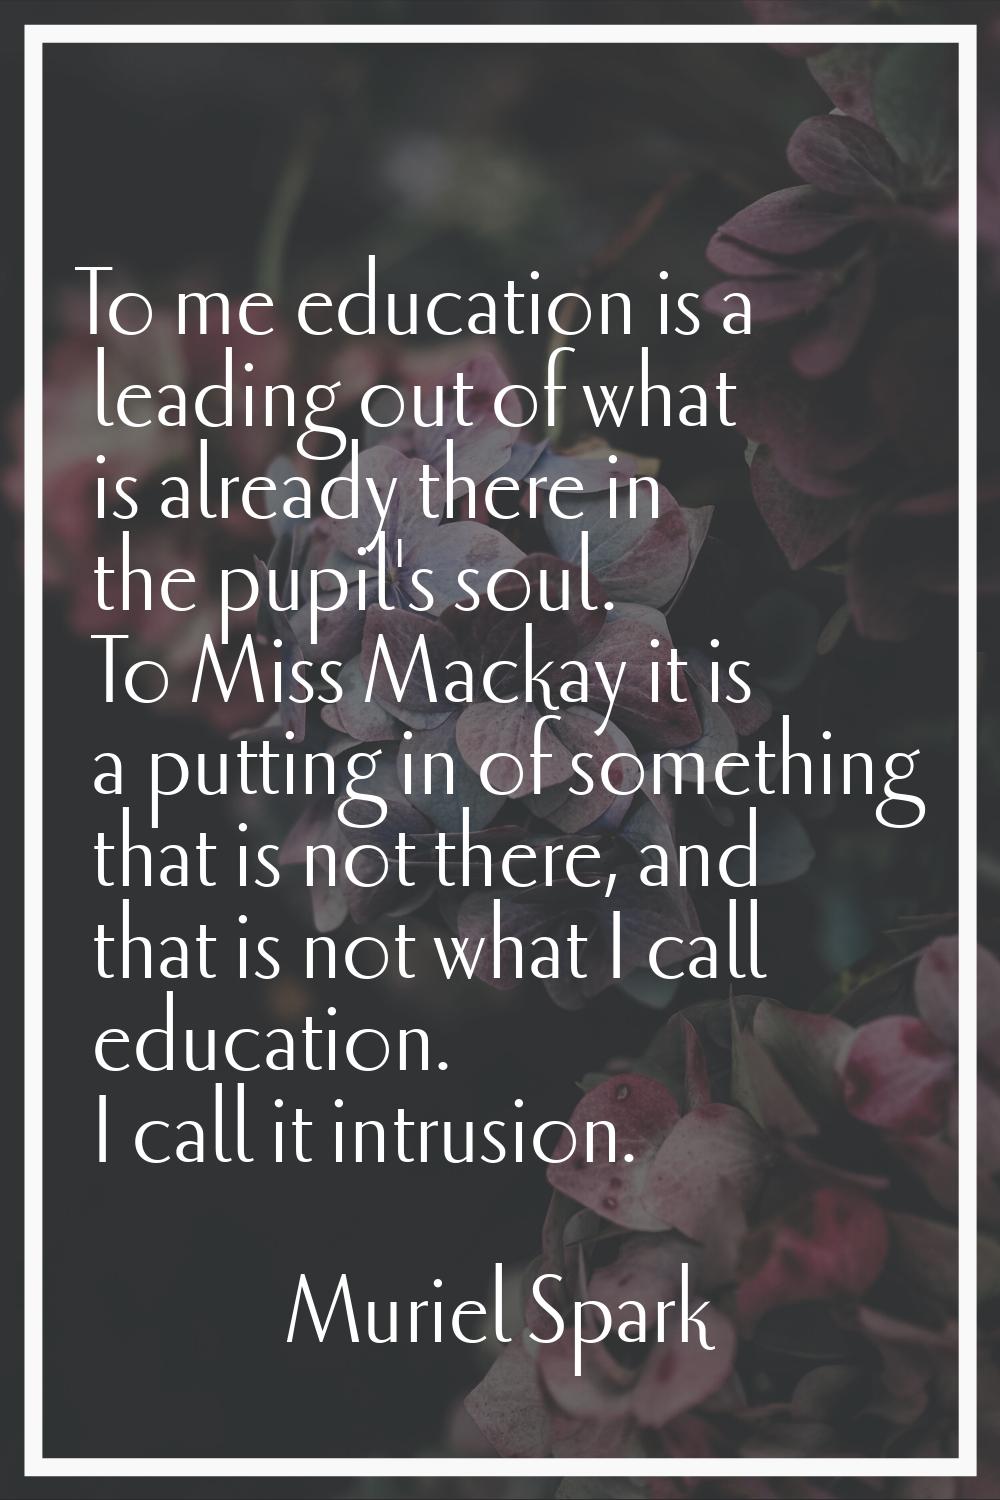 To me education is a leading out of what is already there in the pupil's soul. To Miss Mackay it is